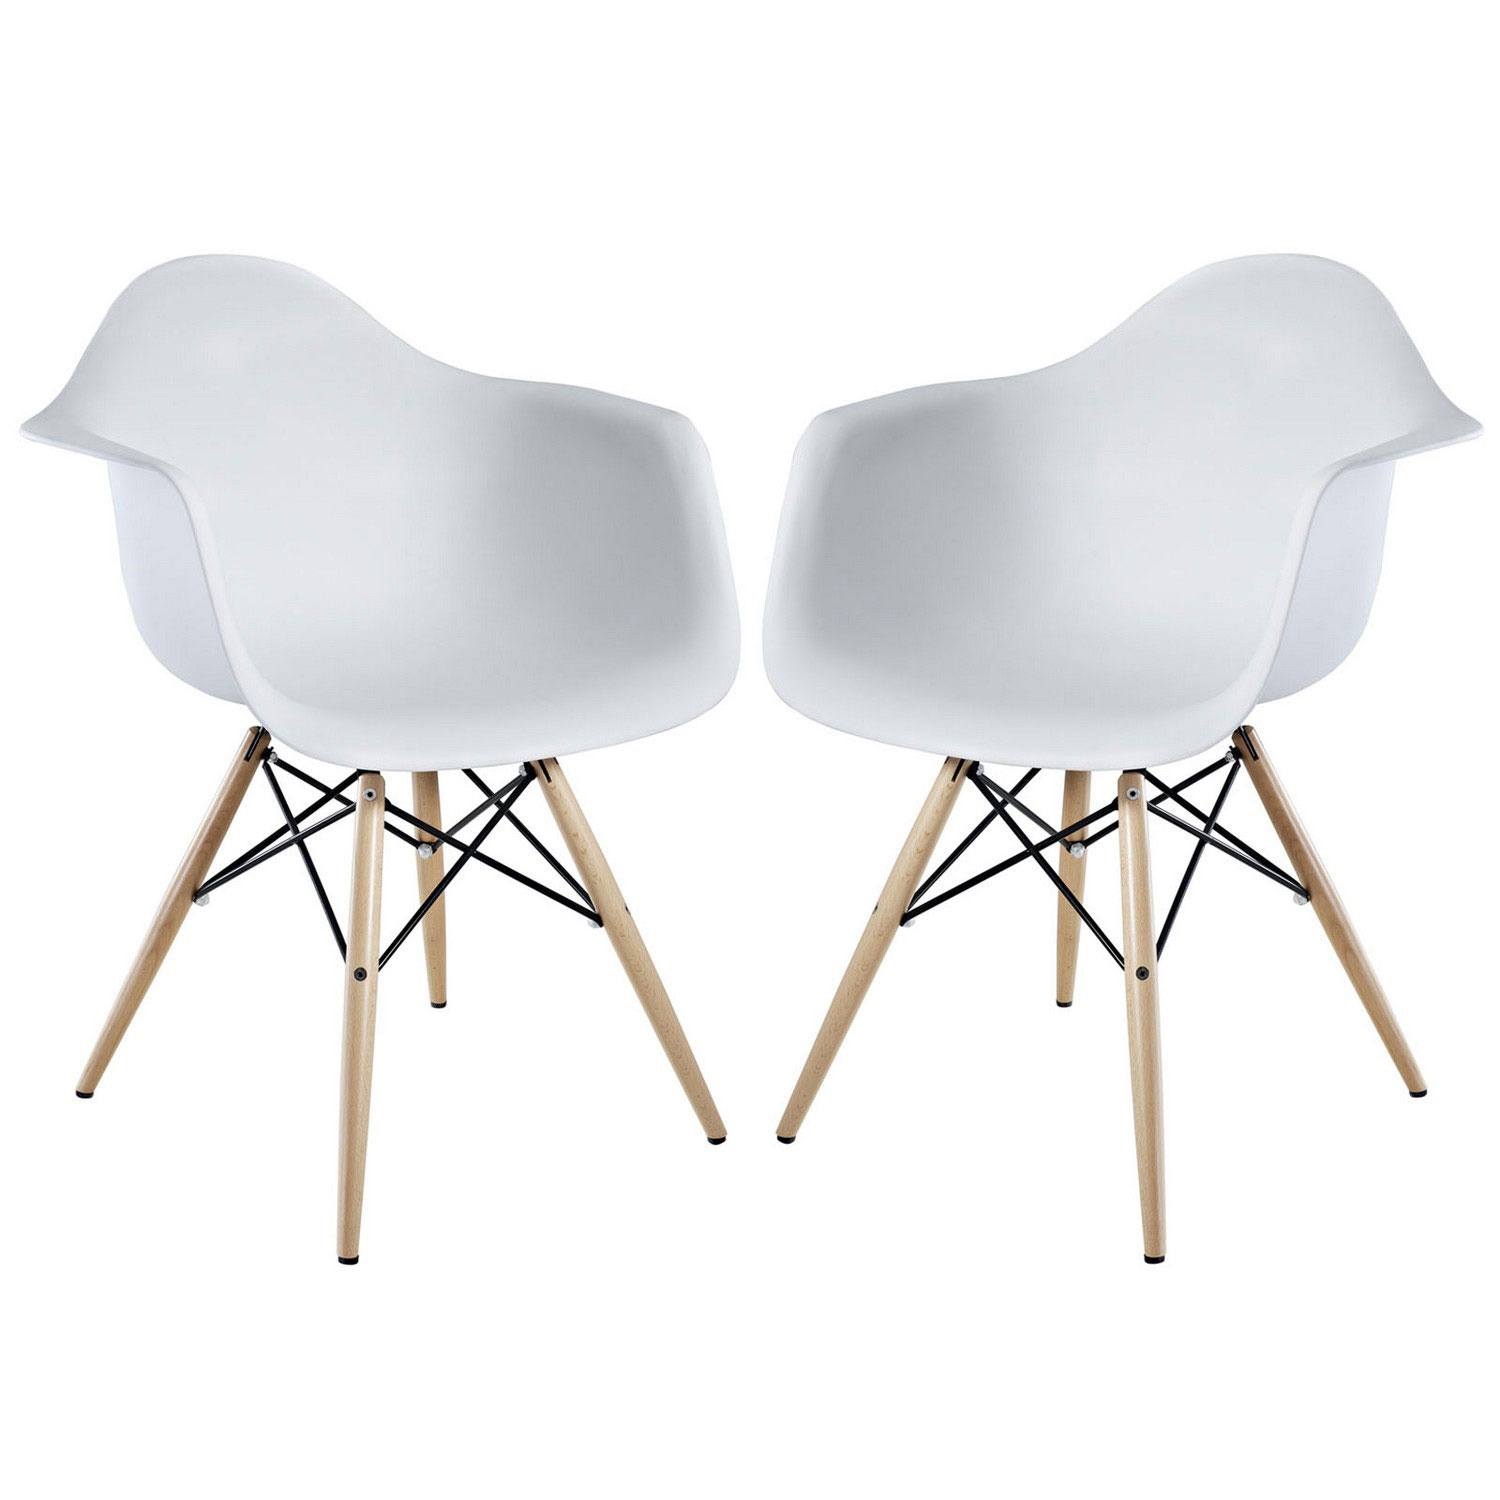 Modway Pyramid Dining Armchair Set of 2 - White